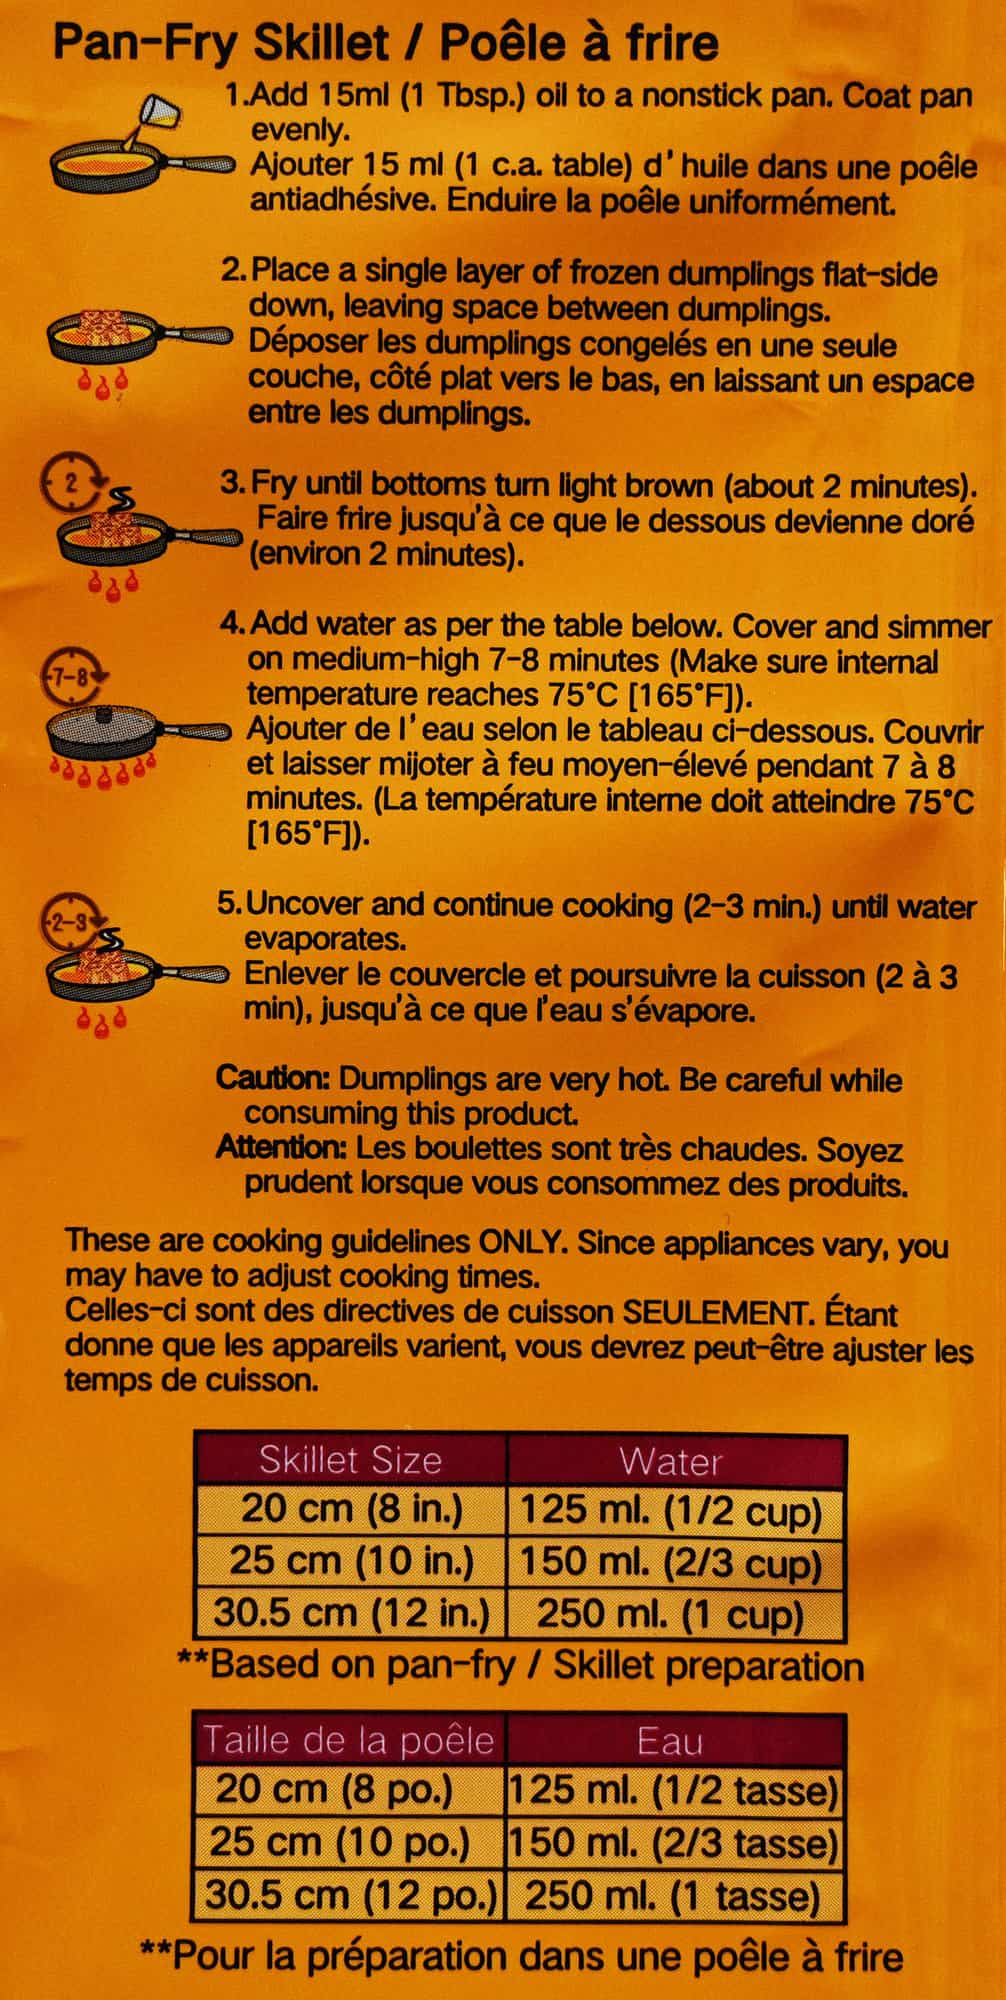 Image of the pan-fry skillet cooking instructions from the packaging.